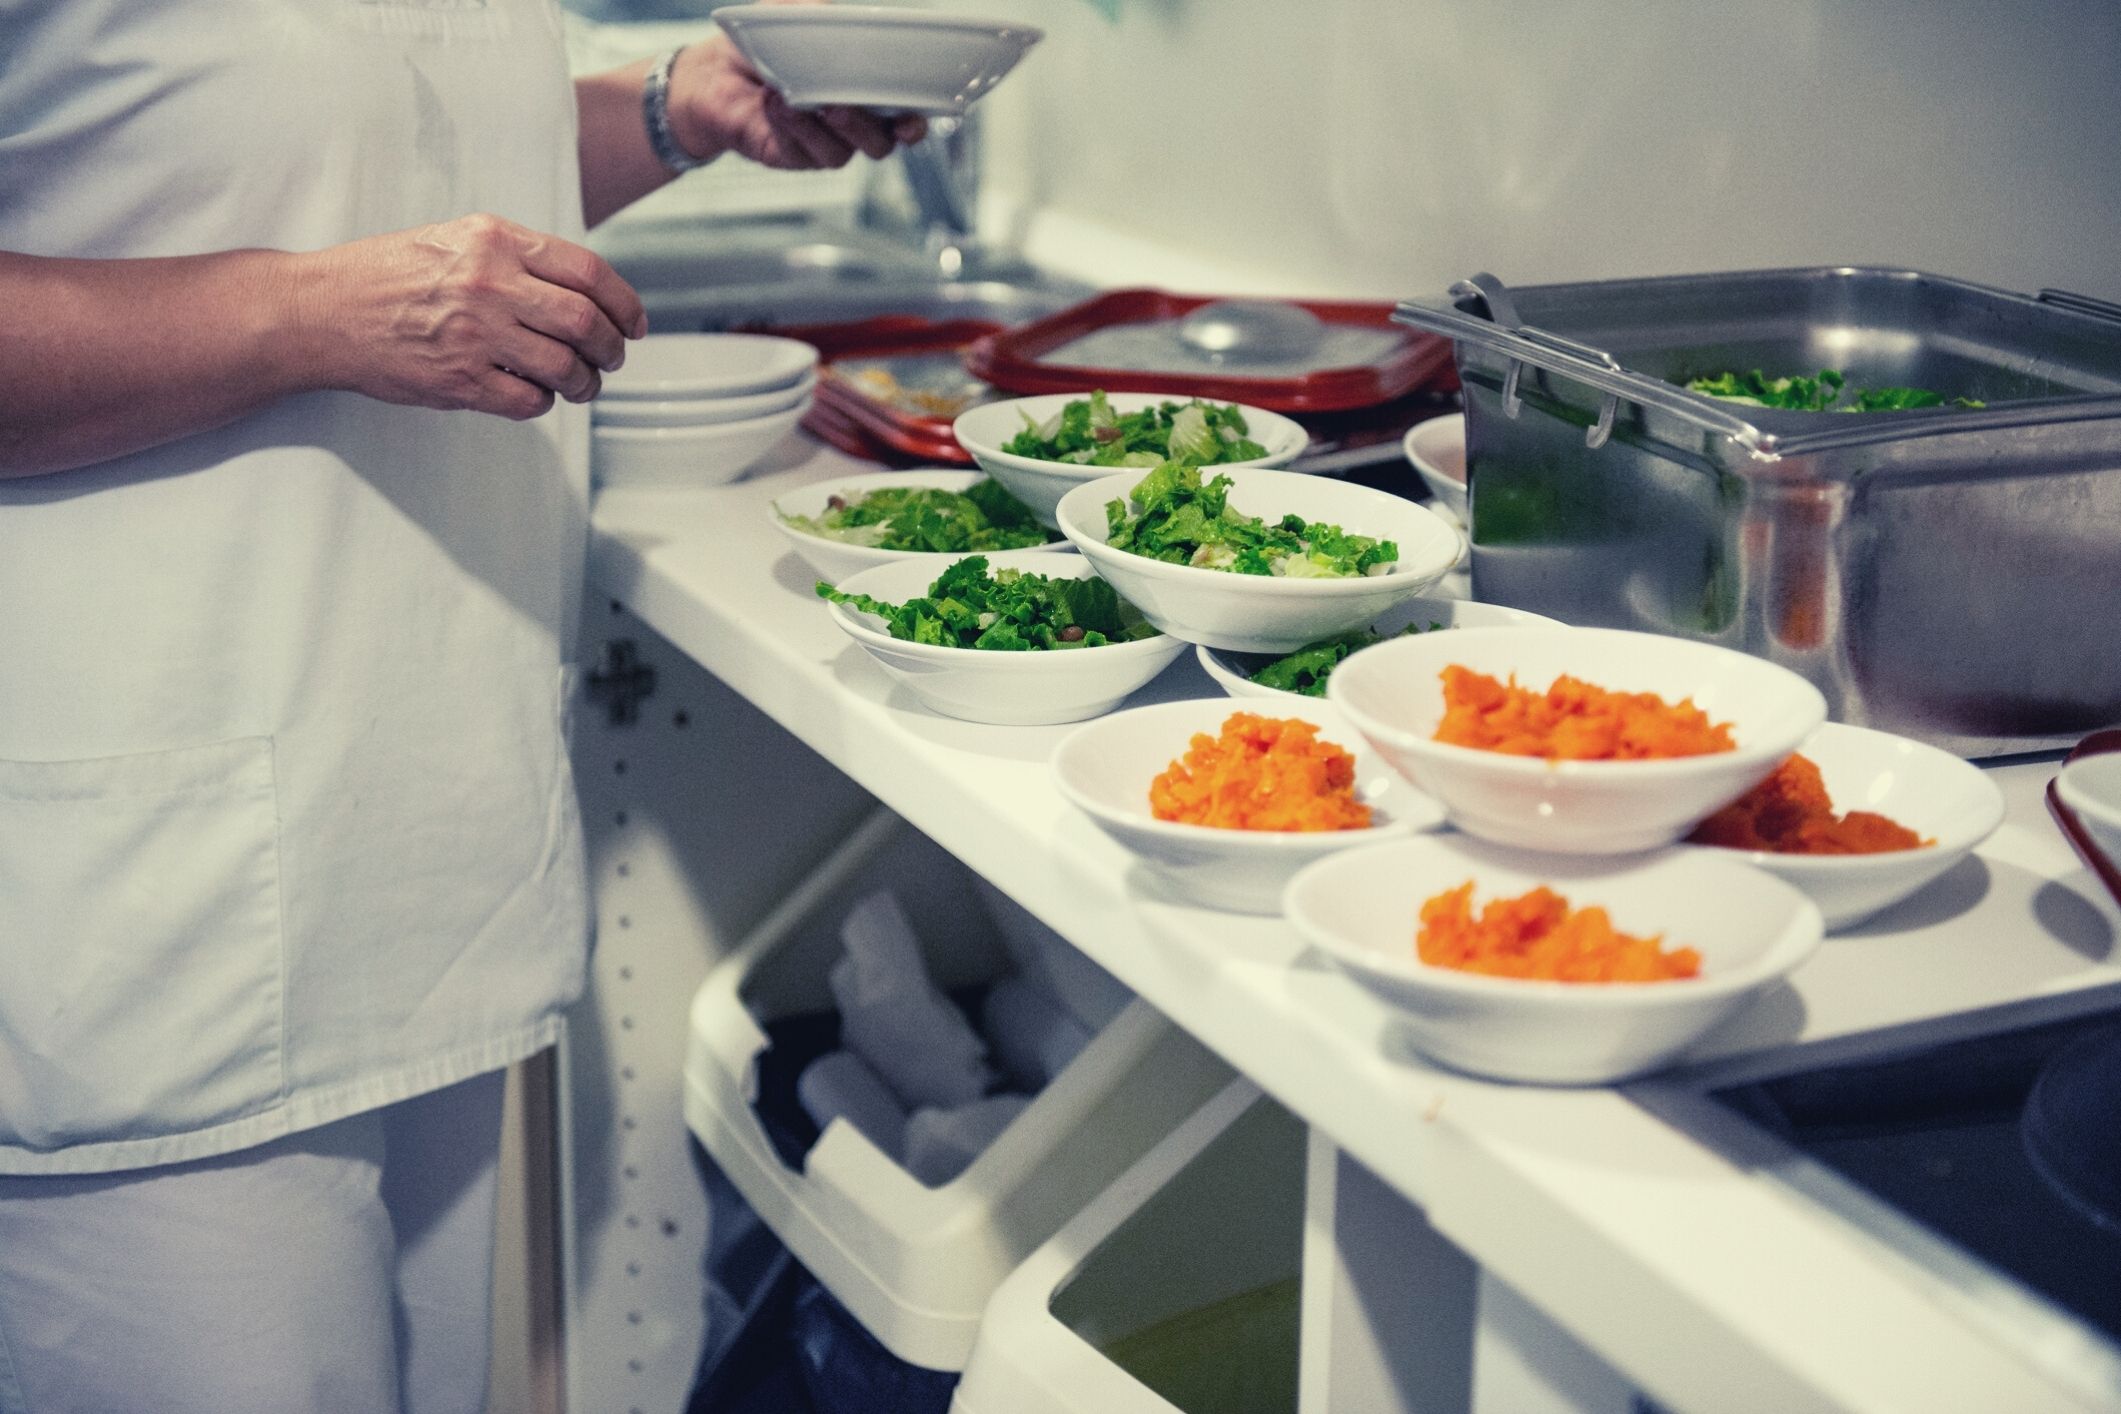 Aged care food being prepped